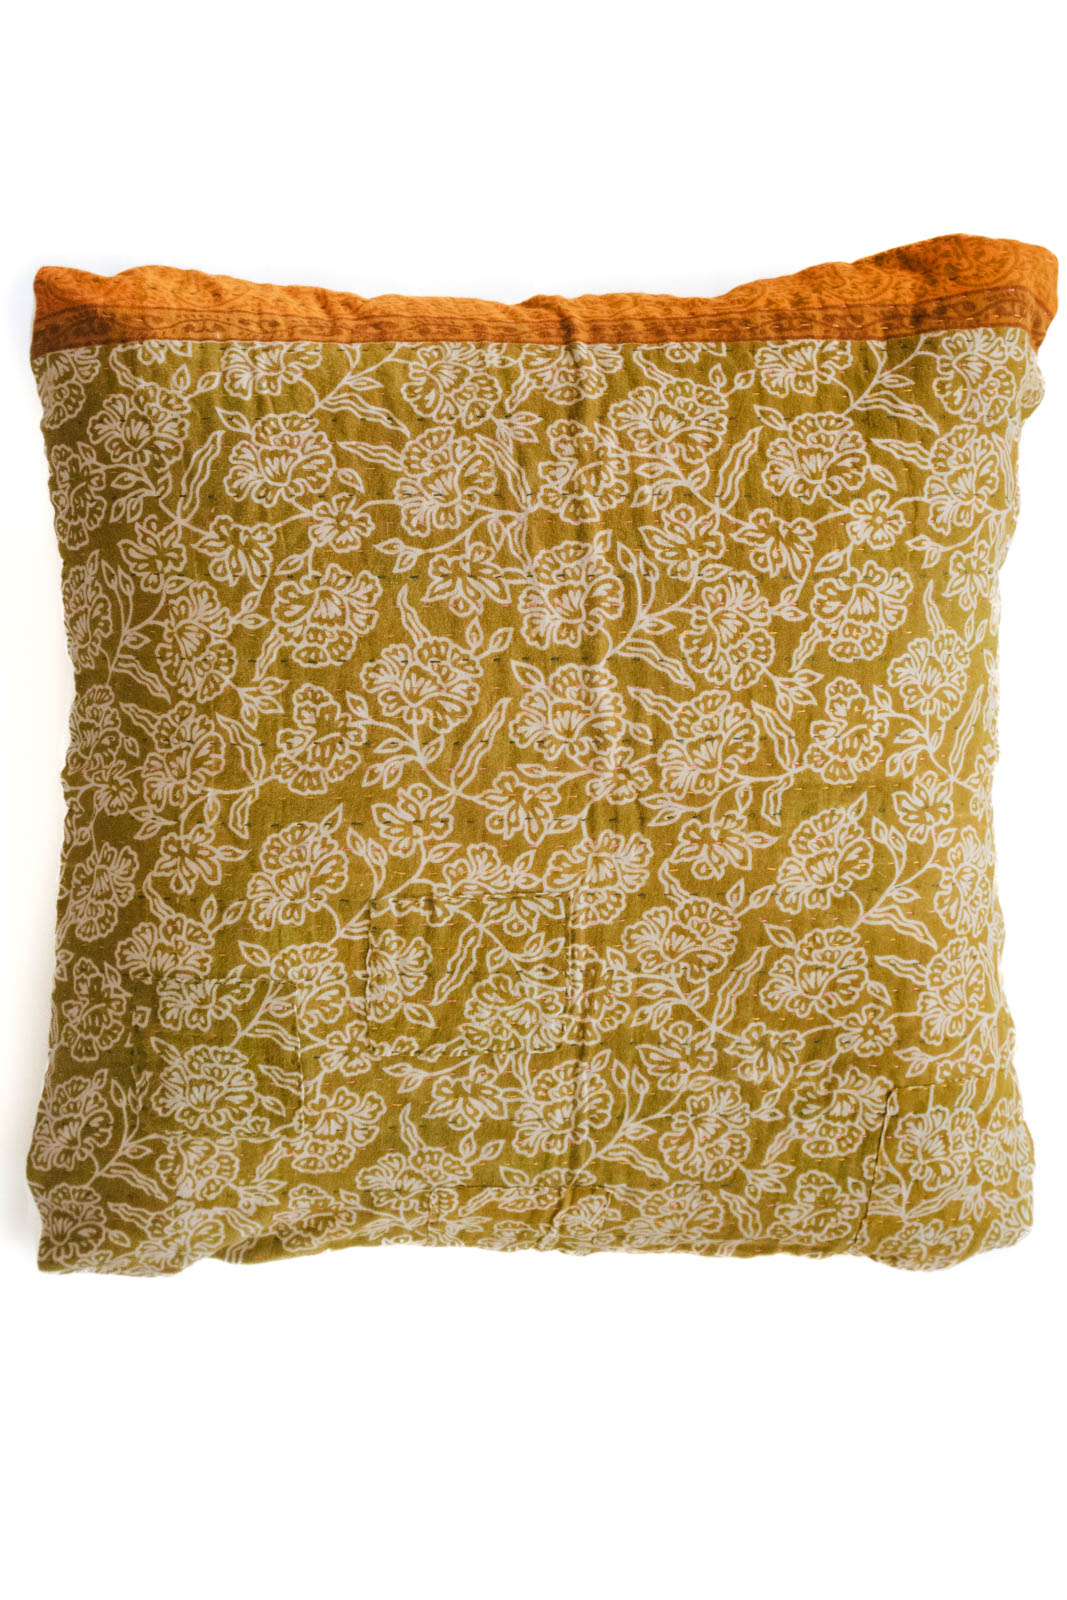 Fearless no. 7 Kantha Pillow Cover